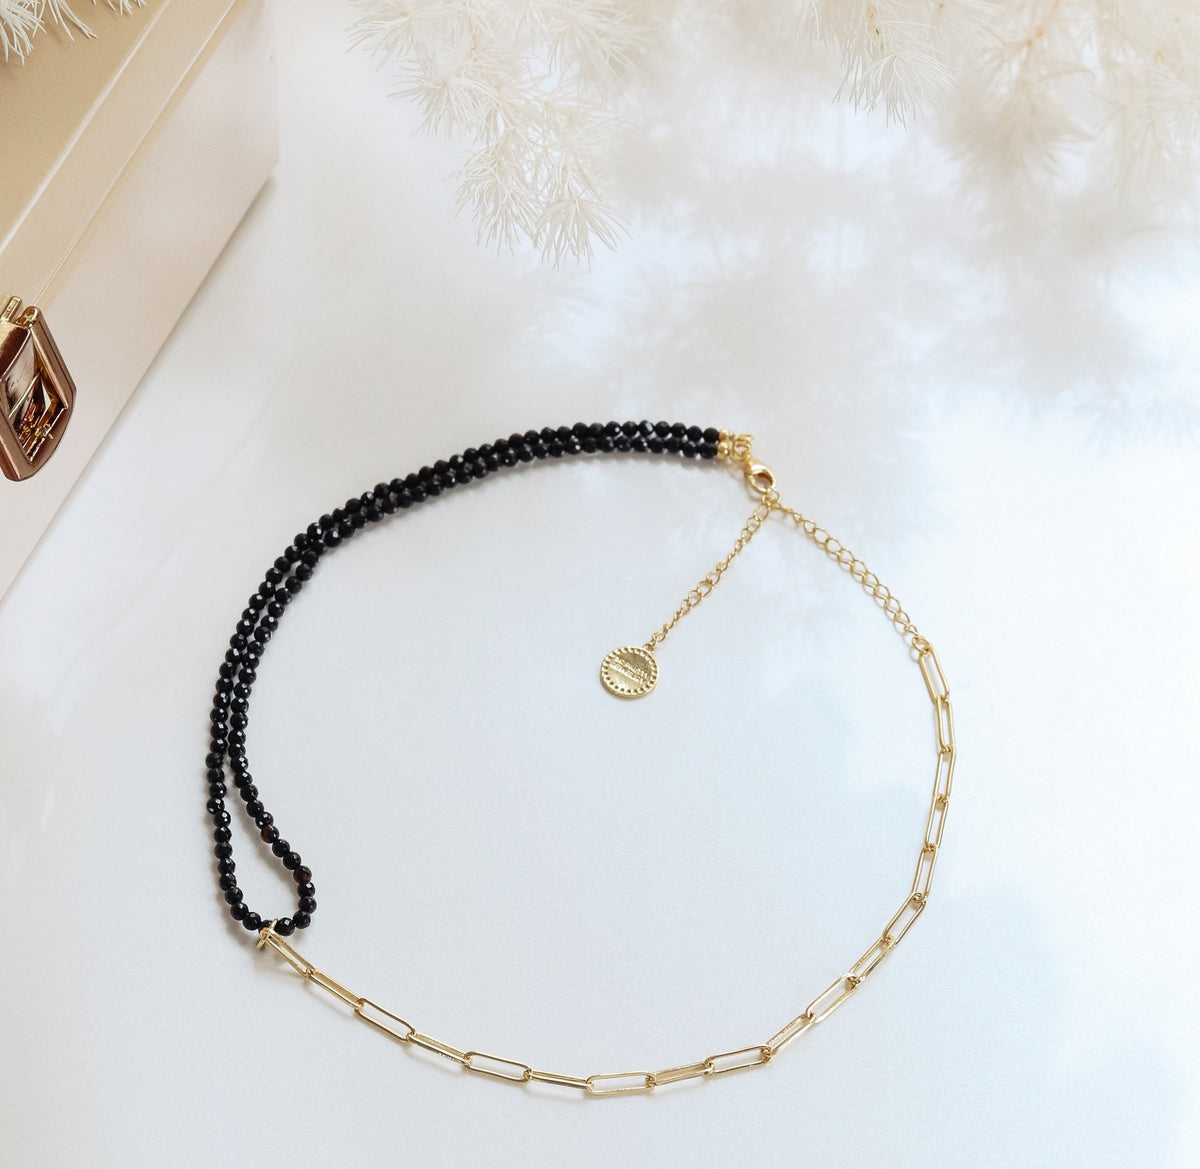 POISE BEADED LINK NECKLACE - BLACK ONYX &amp; GOLD - SO PRETTY CARA COTTER